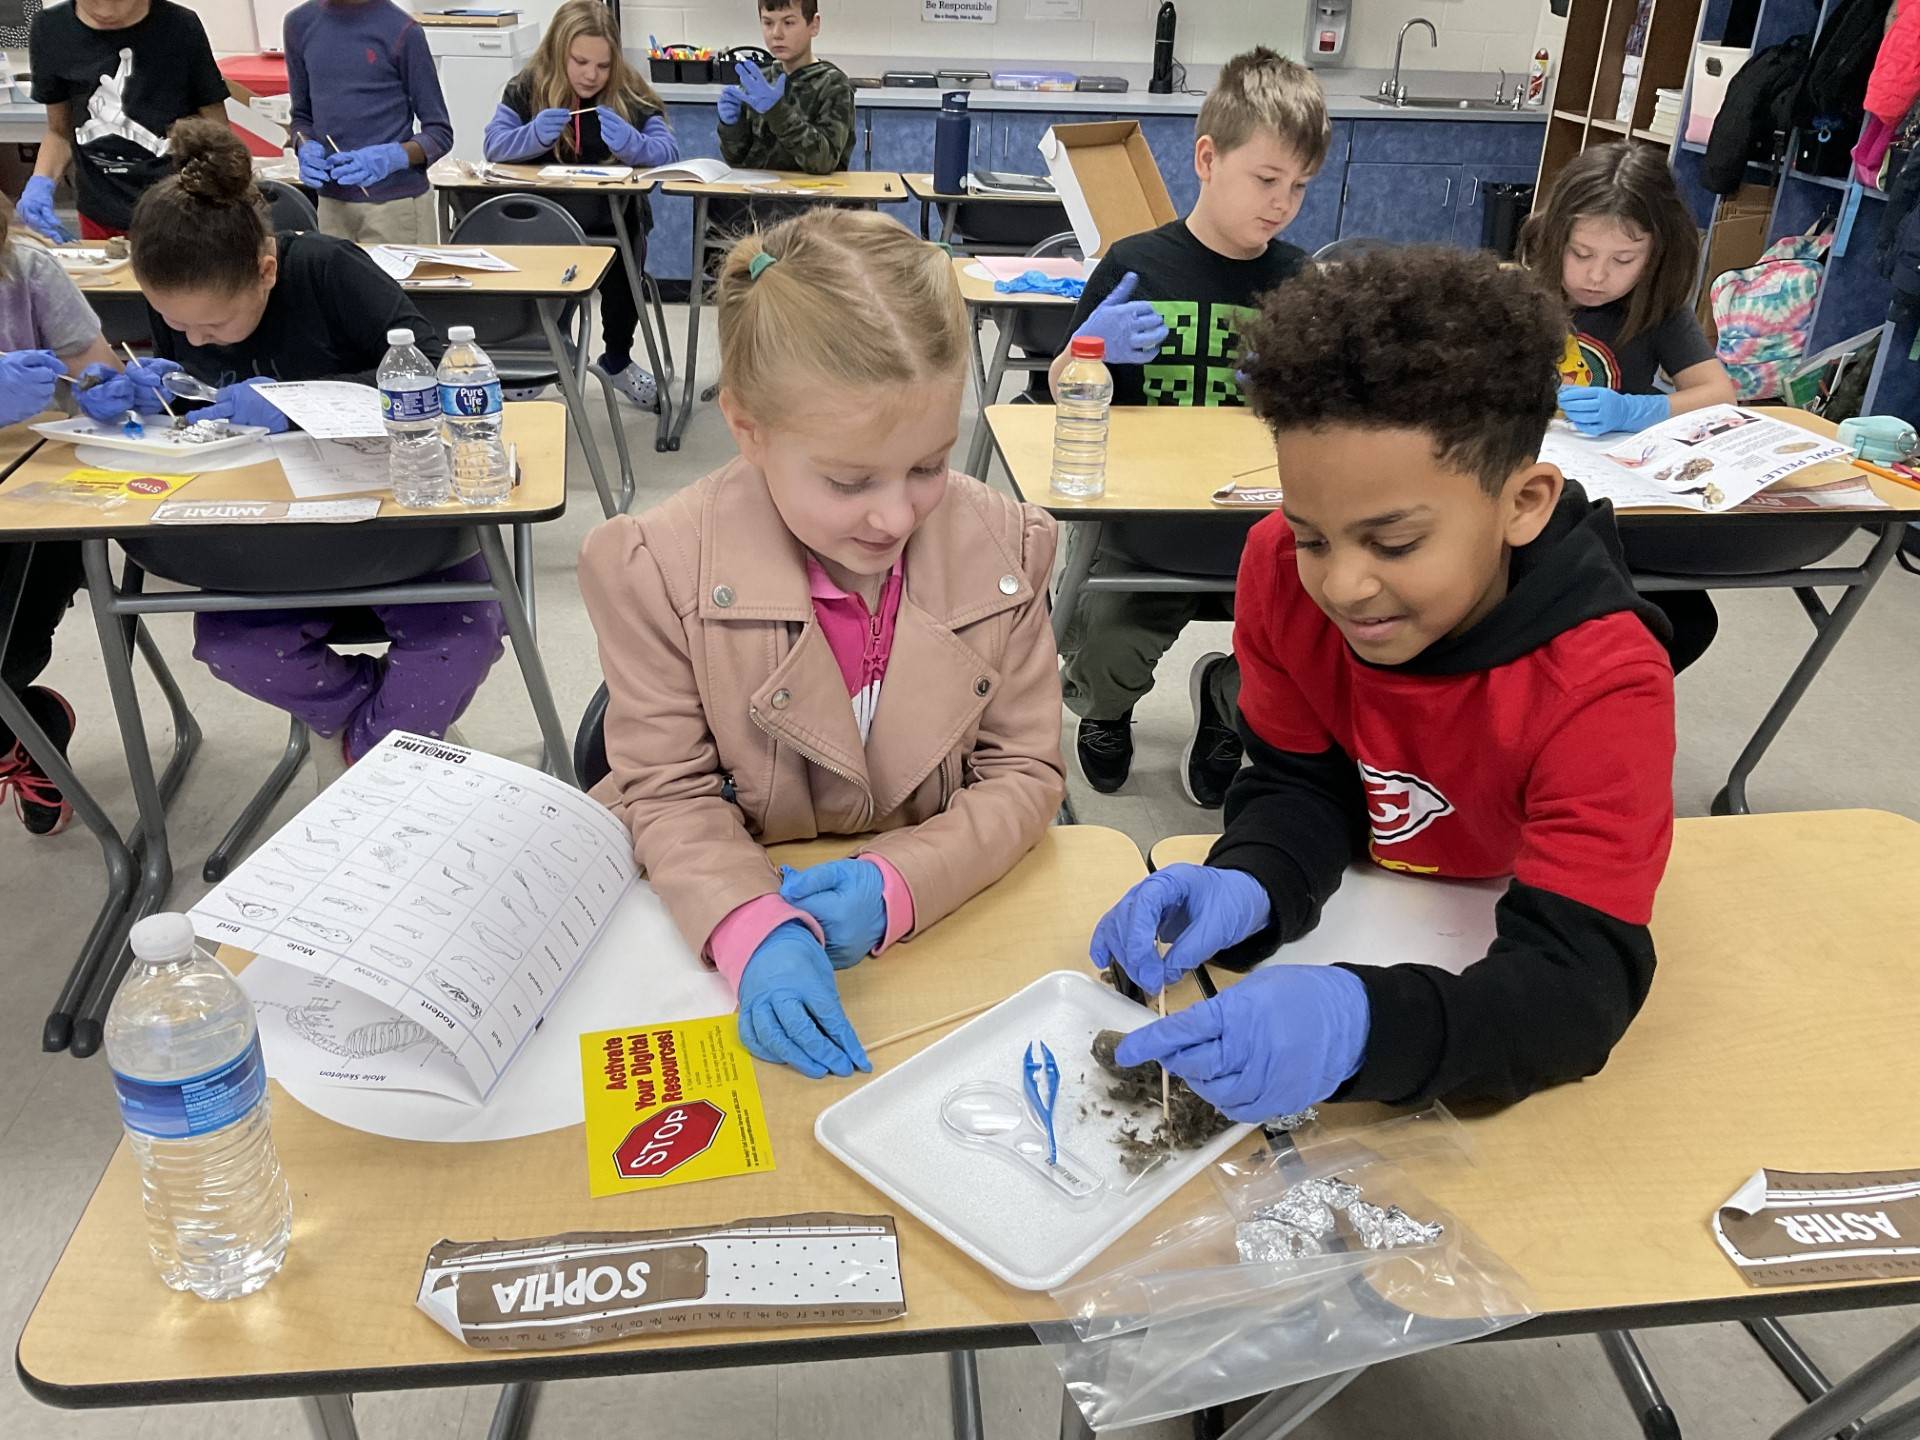 Third Graders exercised their skills as scientists in a two-day project on owls